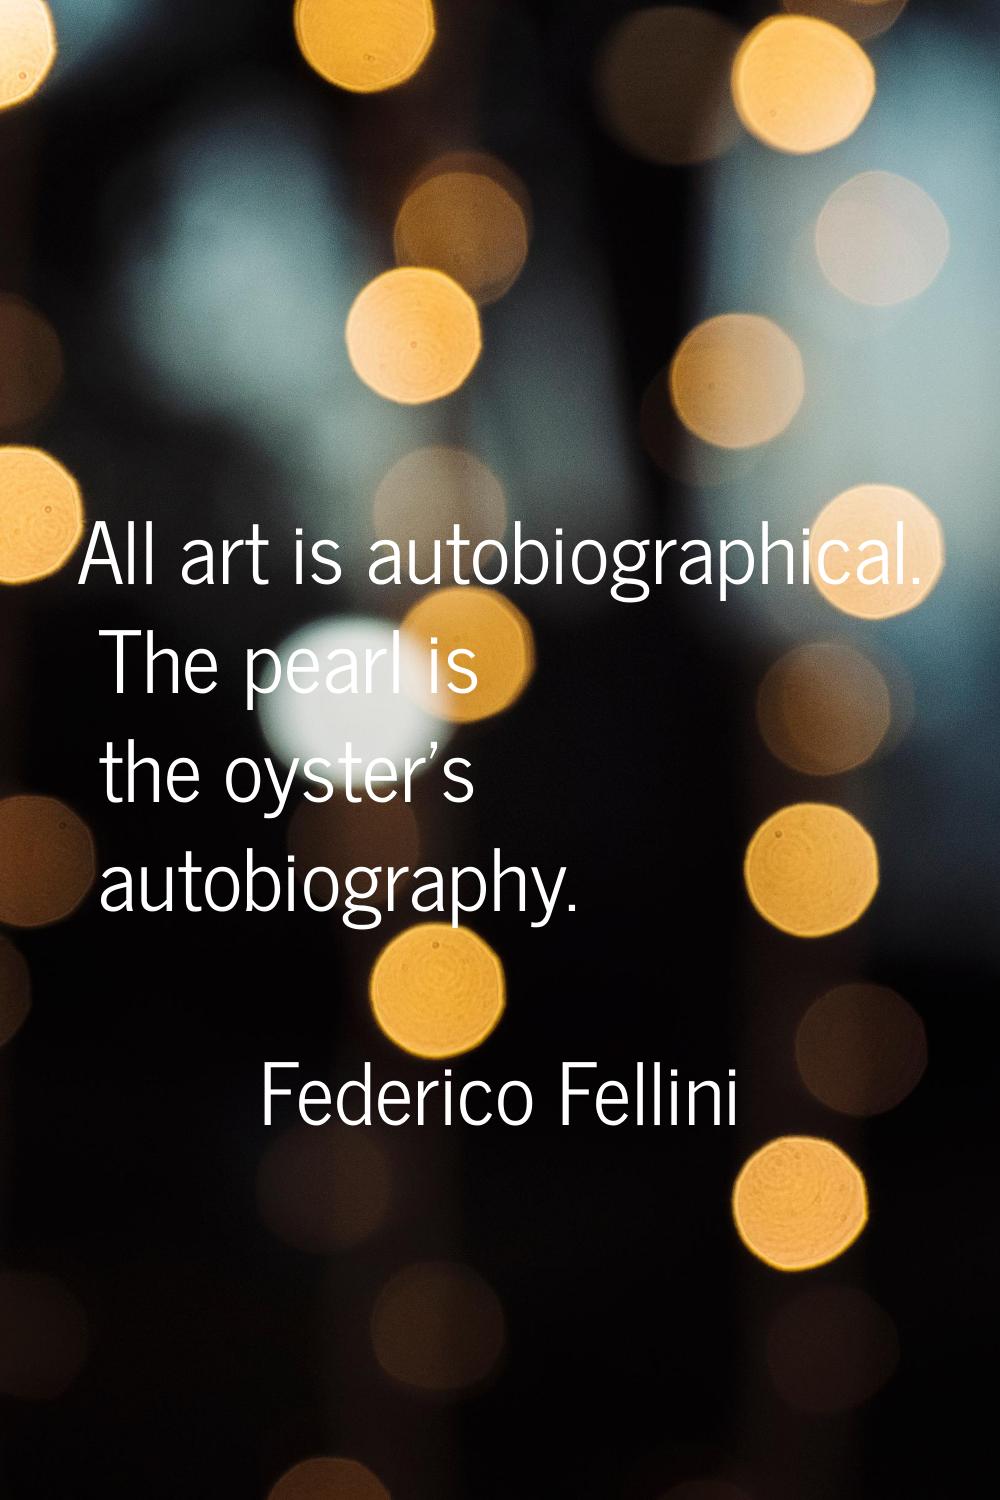 All art is autobiographical. The pearl is the oyster's autobiography.